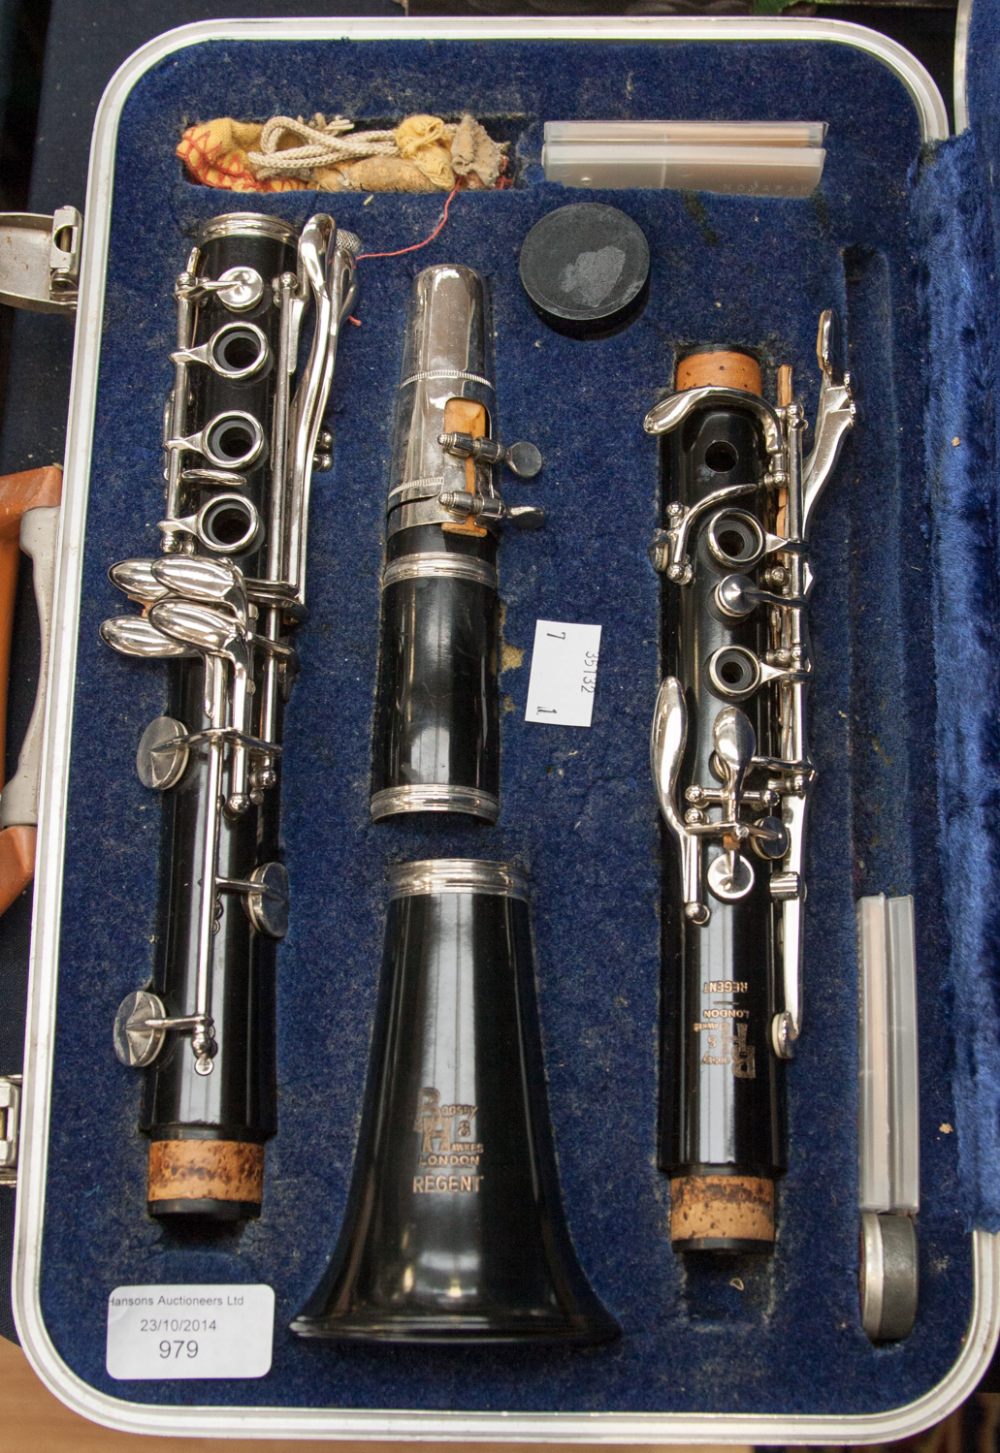 A cased Boosey and Hawkes Regent plastic clarinet, with some accessories